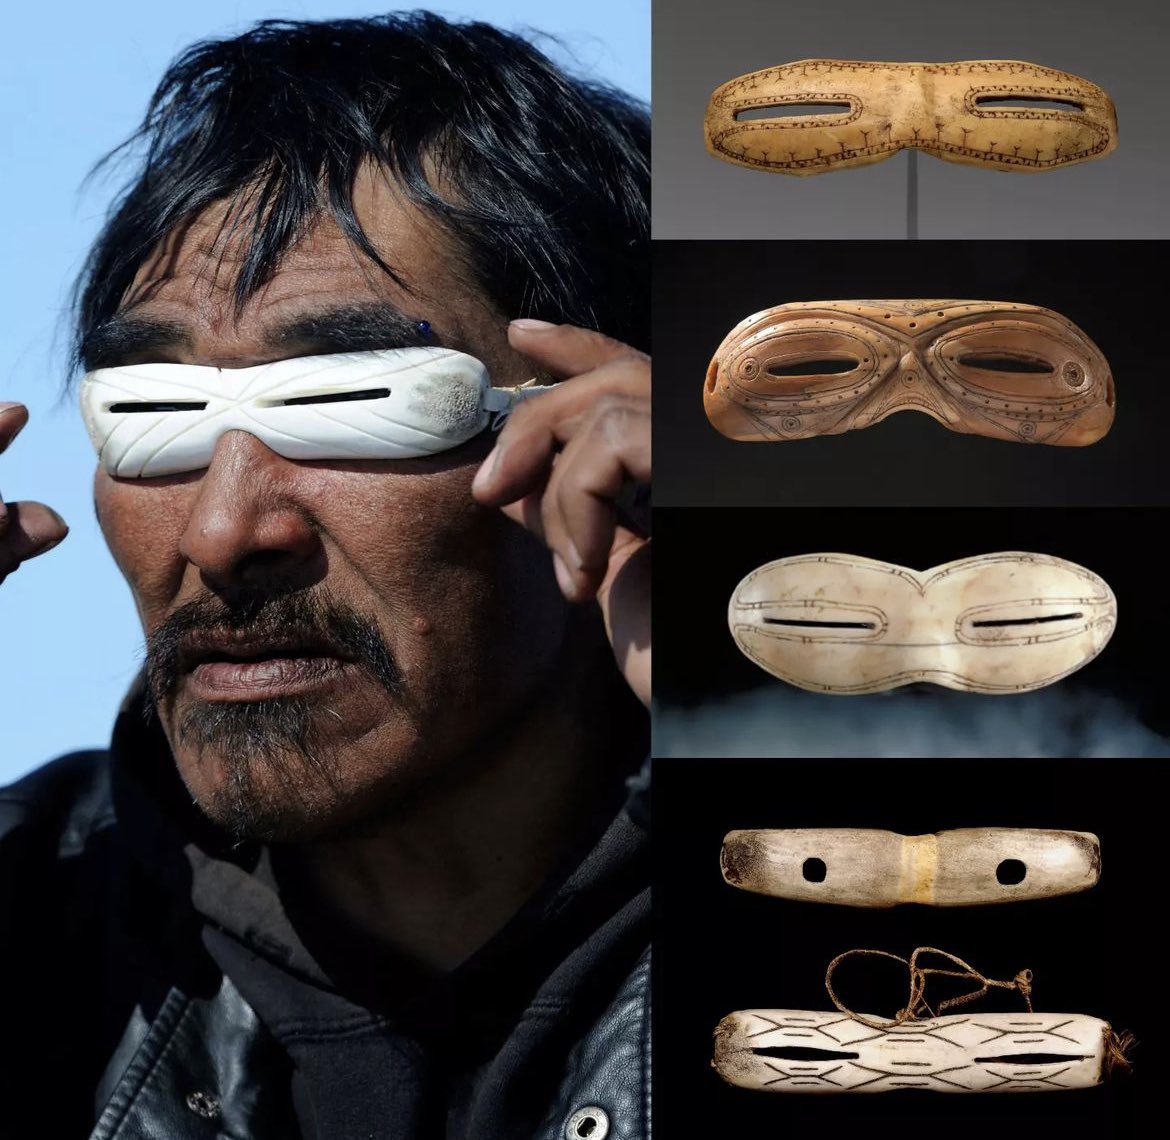 For thousands of years, the Inuit and Yupik people of the Arctic have been using traditional snow goggles made of walrus ivory, caribou antler, or driftwood.

The narrow slits helped reduce eye strain and prevent snow blindness. Unlike modern snow goggles, these traditional ones…